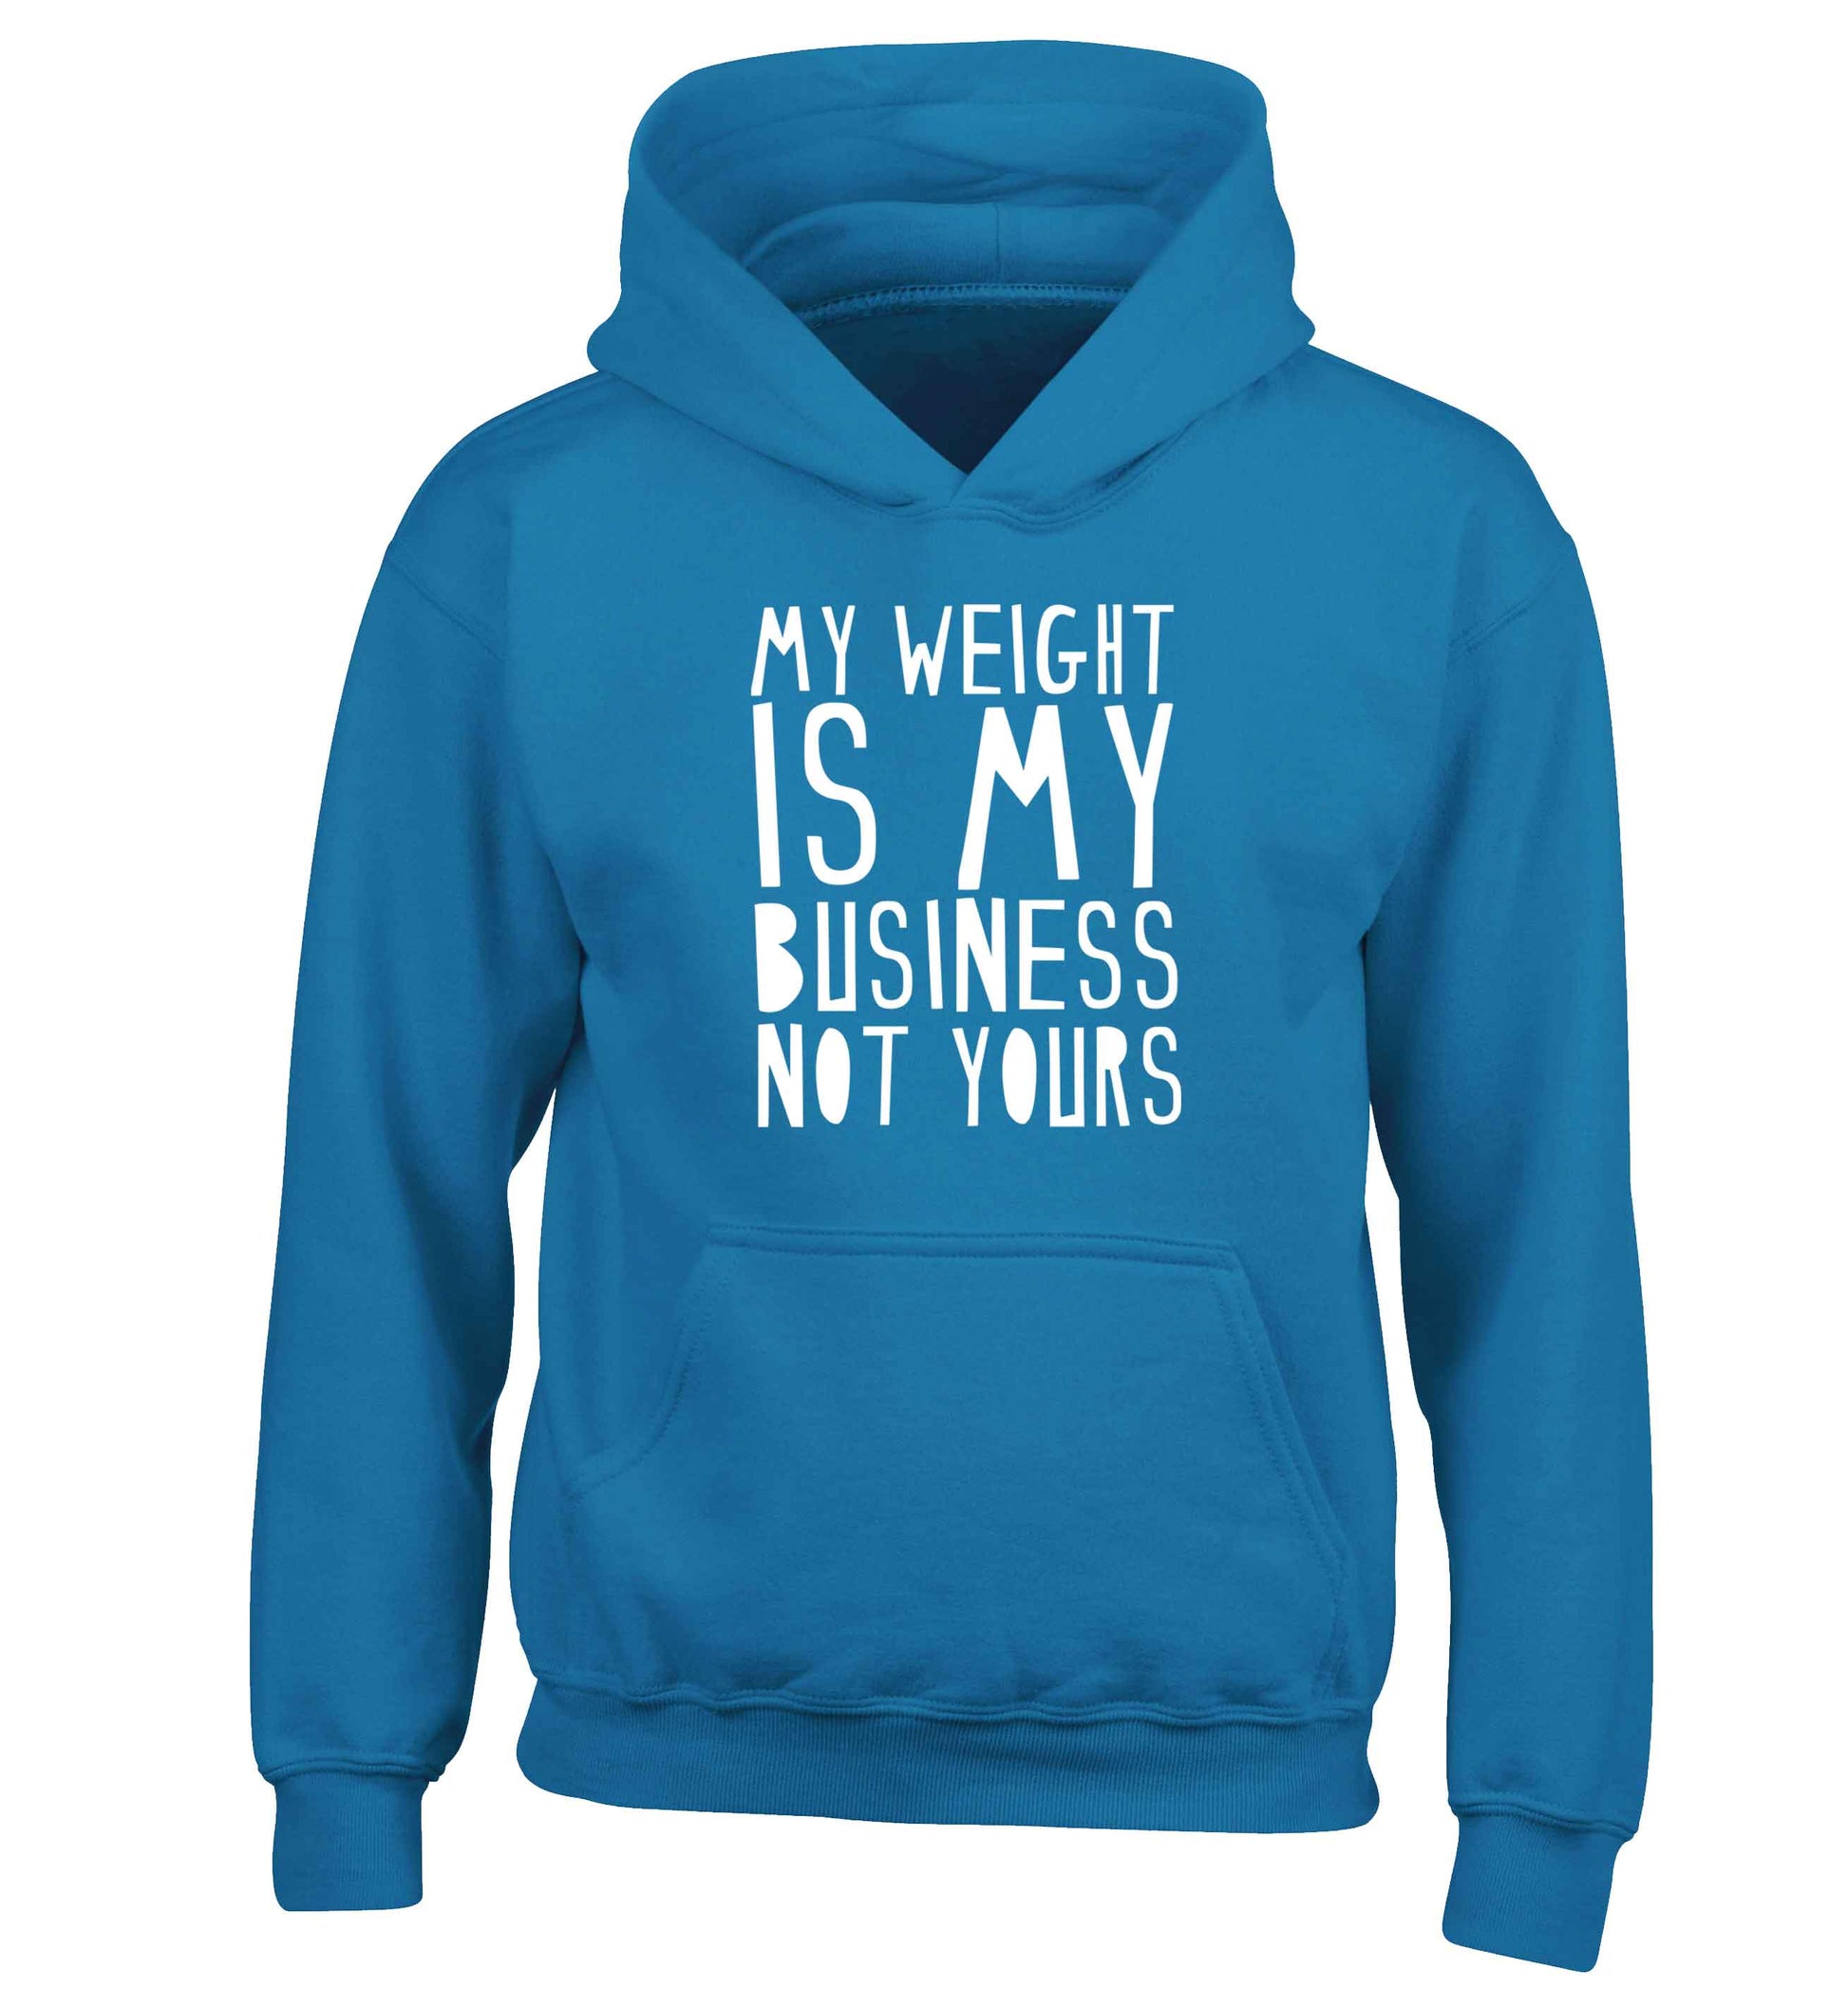 My weight is my business not yours children's blue hoodie 12-13 Years